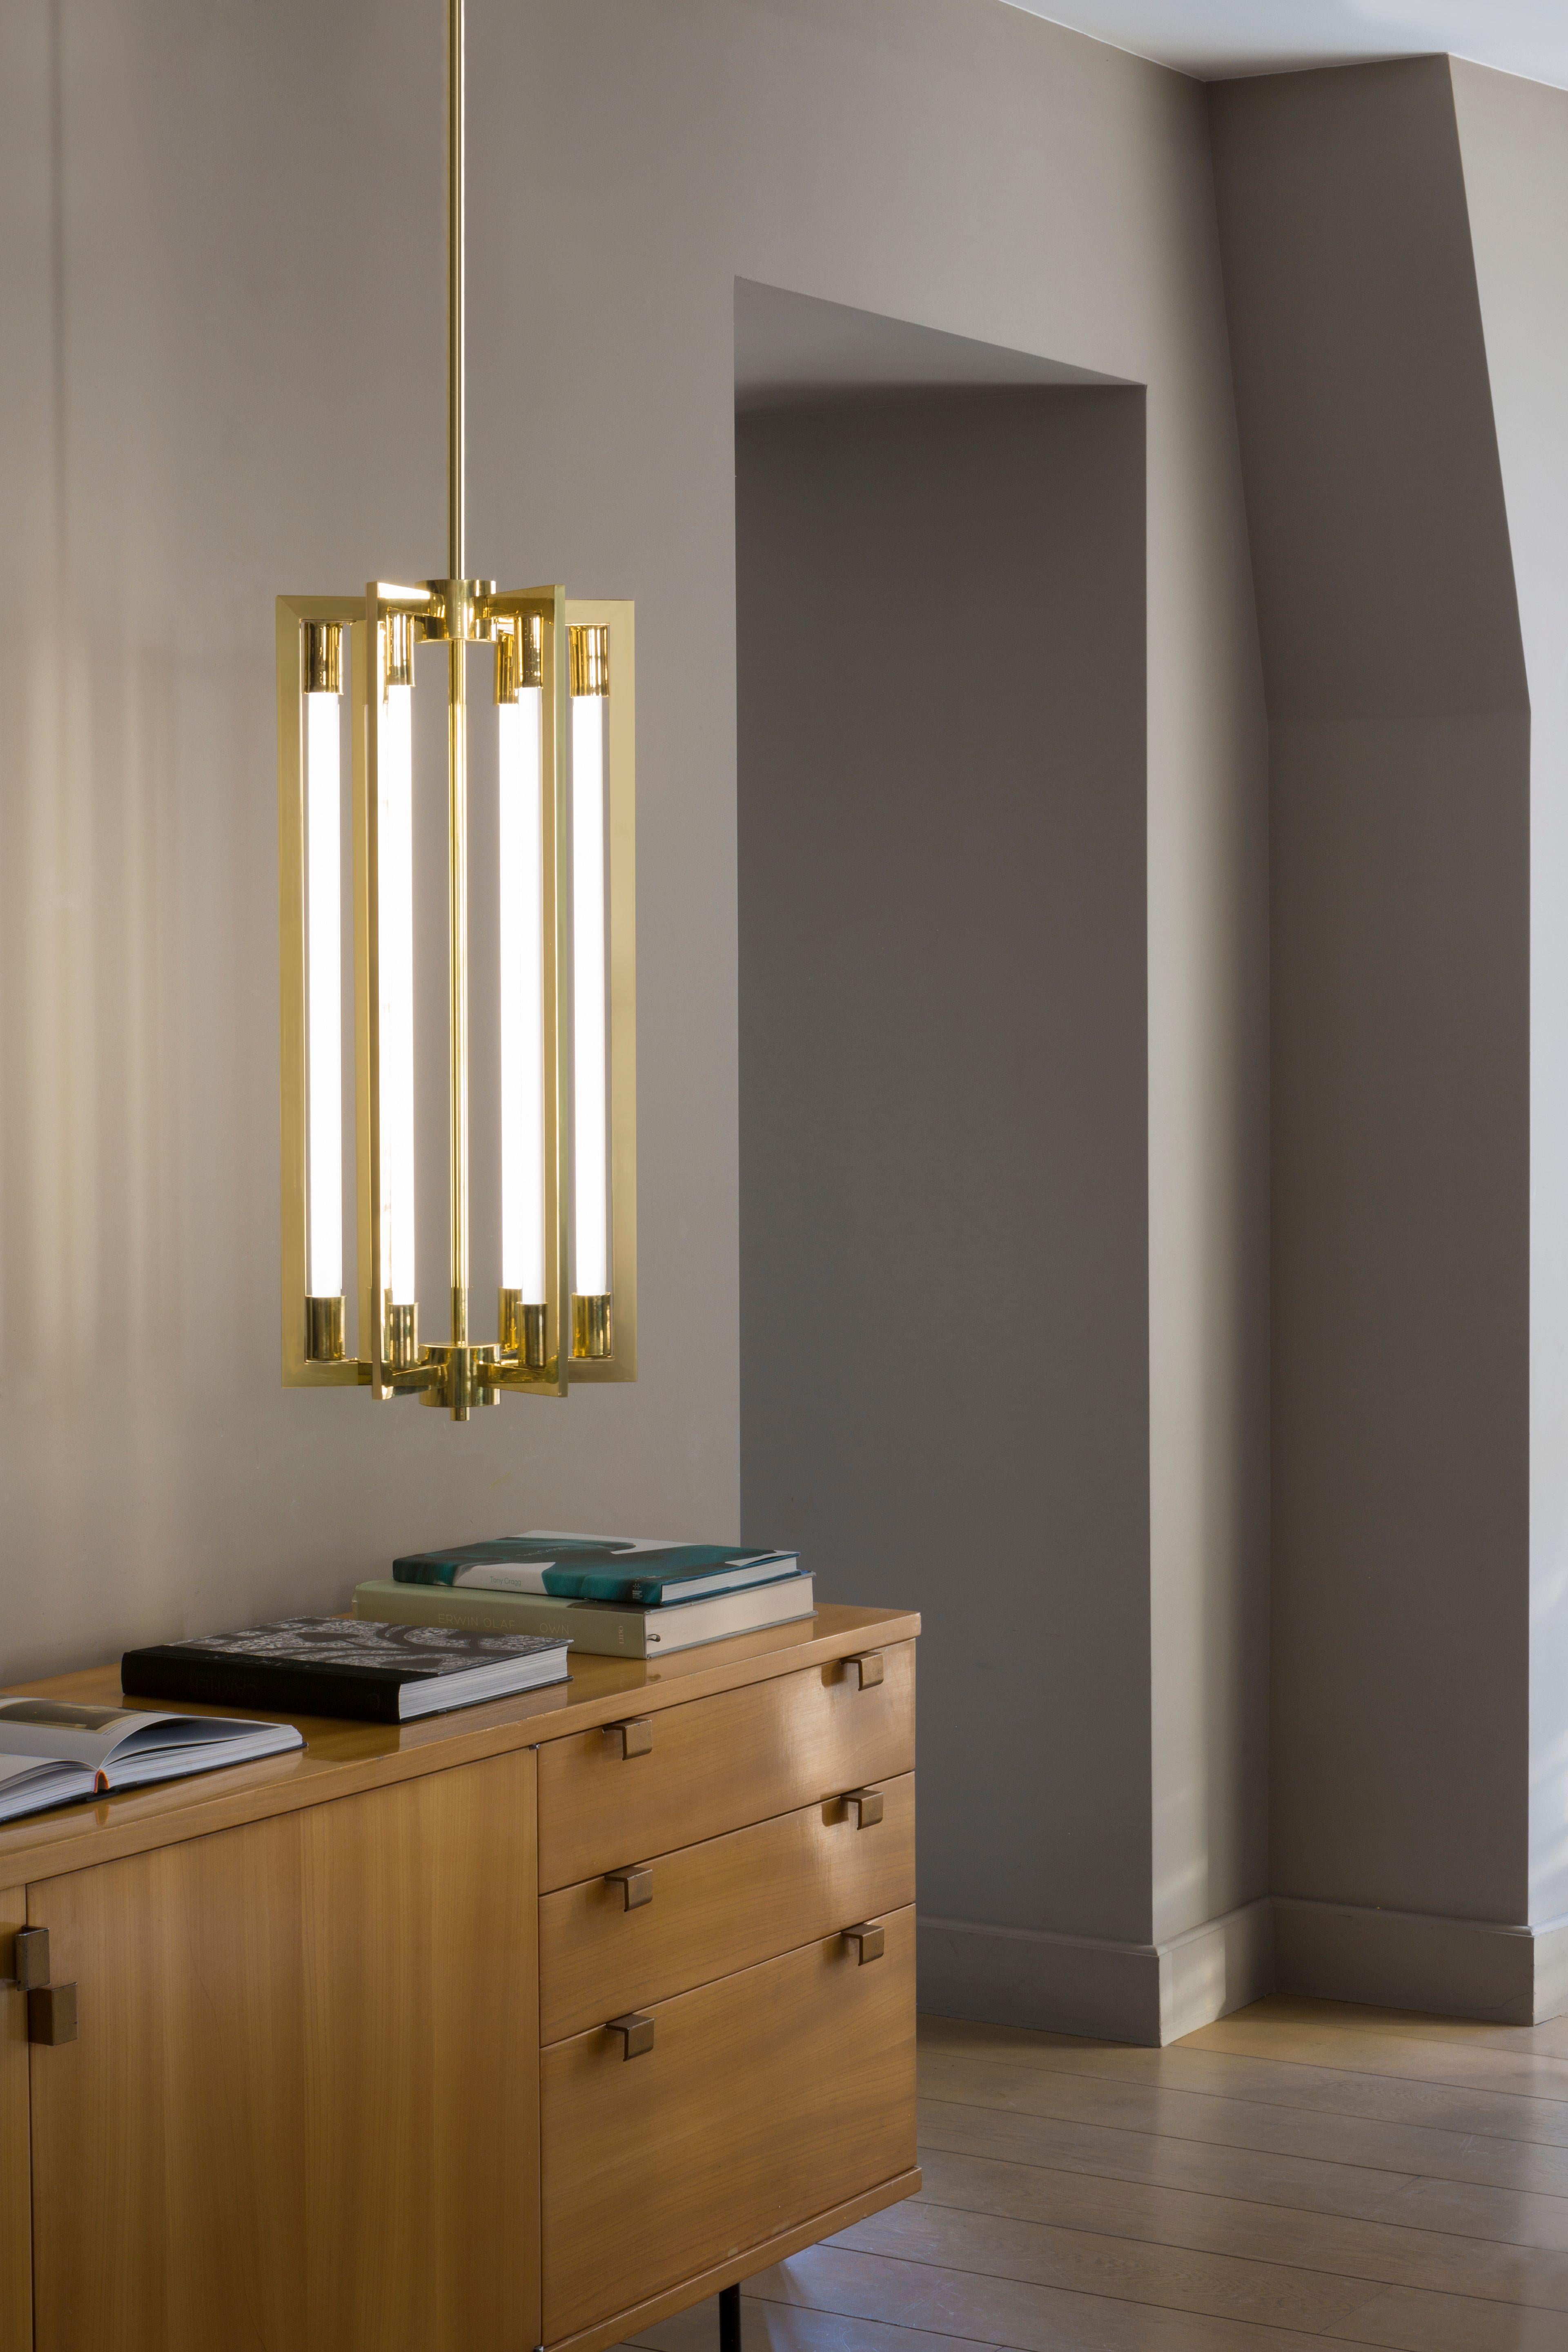 Chandelier 11 opalin glass tube by Magic Circus Editions
Dimensions: W 300 cm
Materials: smooth brass, glass
Available finishes: brass, nickel
6 × Tube LED T8 / 17 W. 220V

All our lamps can be wired according to each country. If sold to the